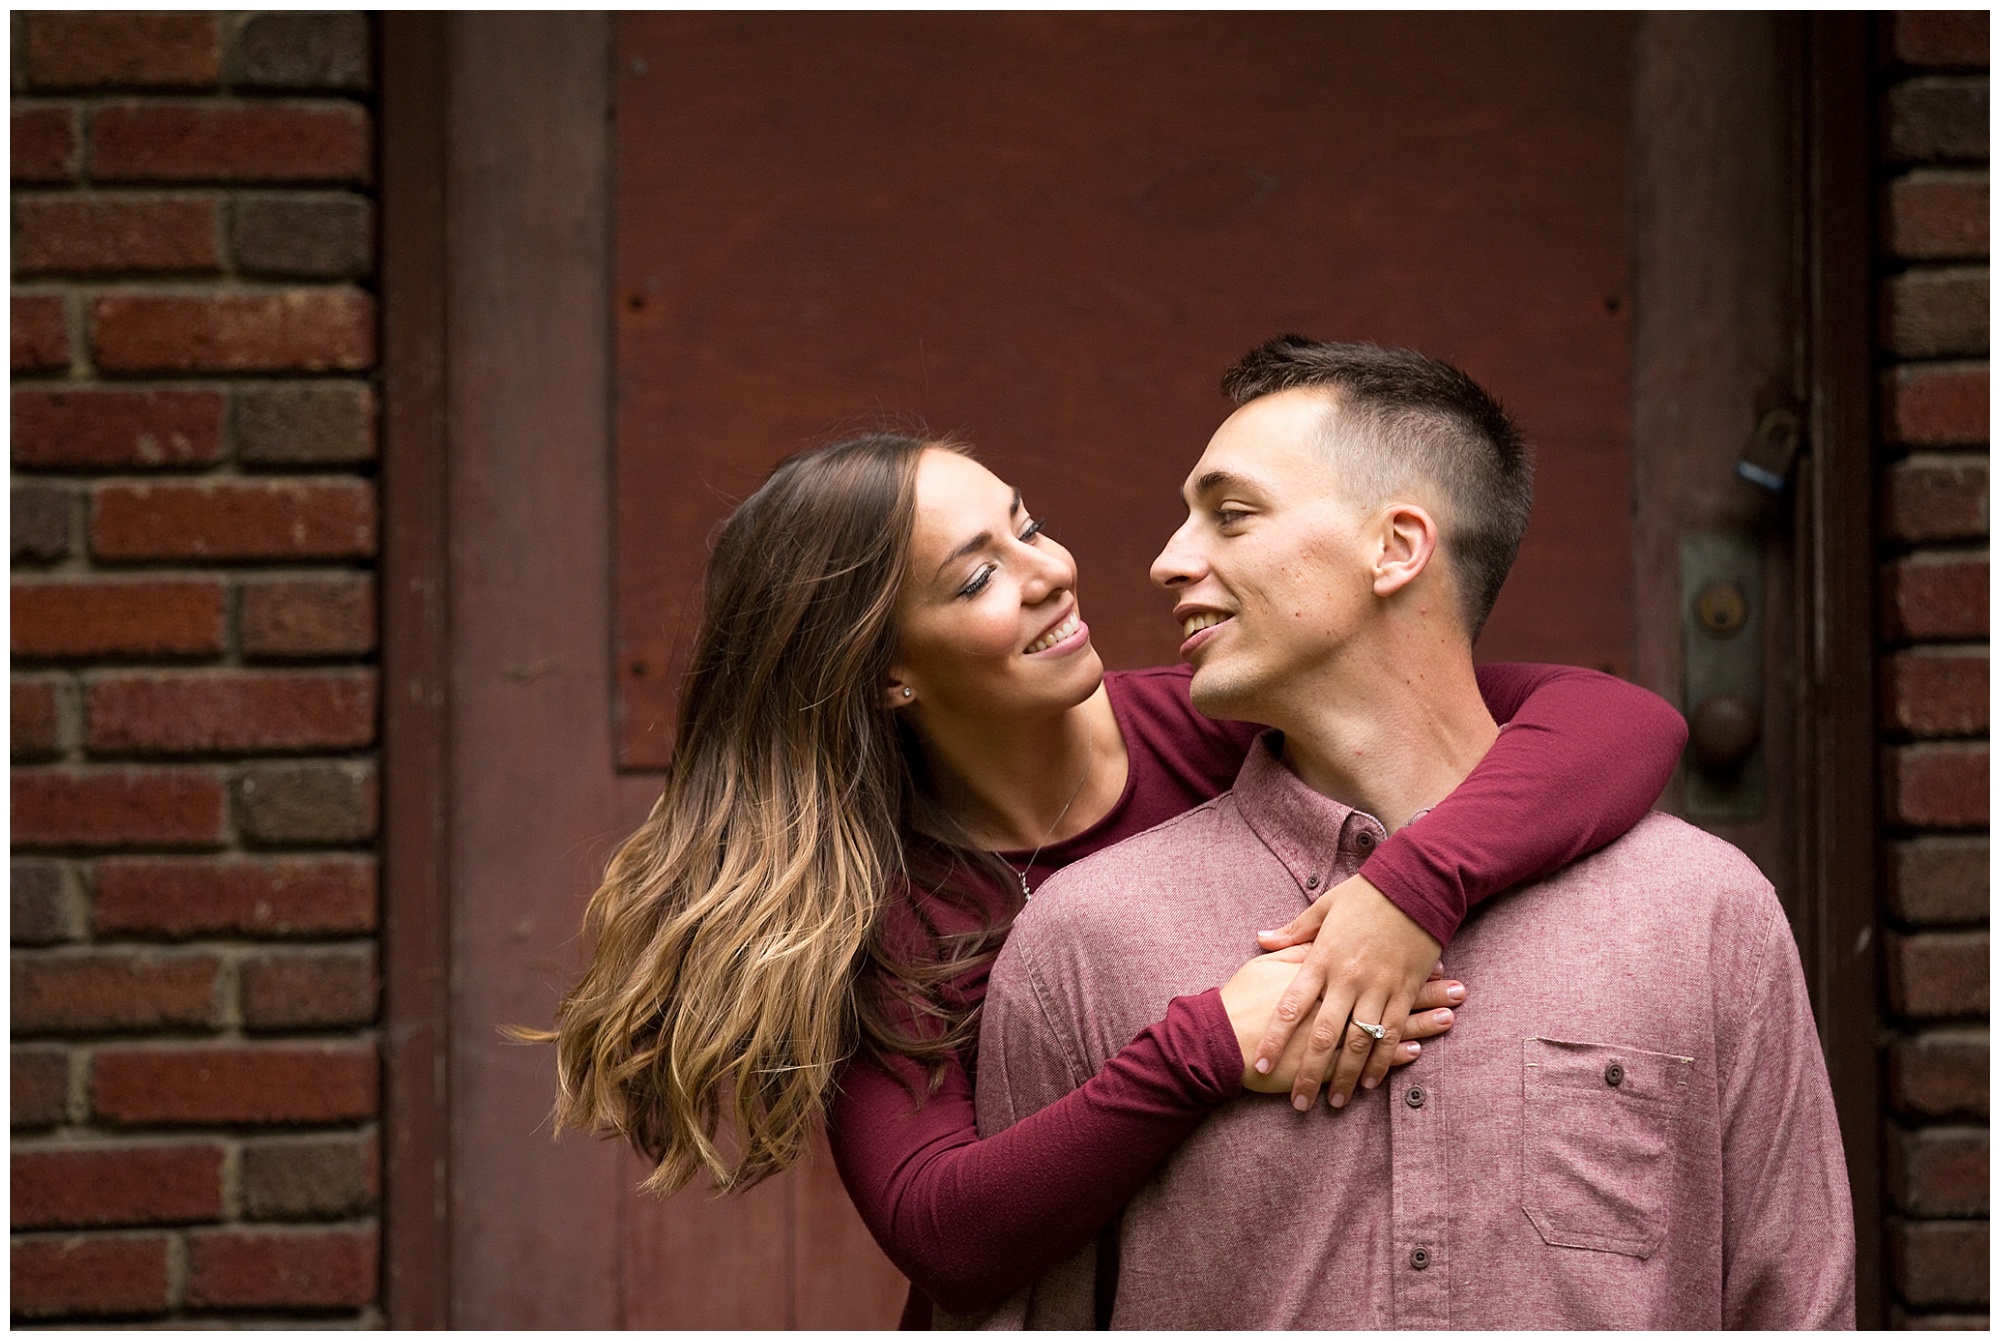 Photo of an engaged couple with her arms wrapped around him from behind.